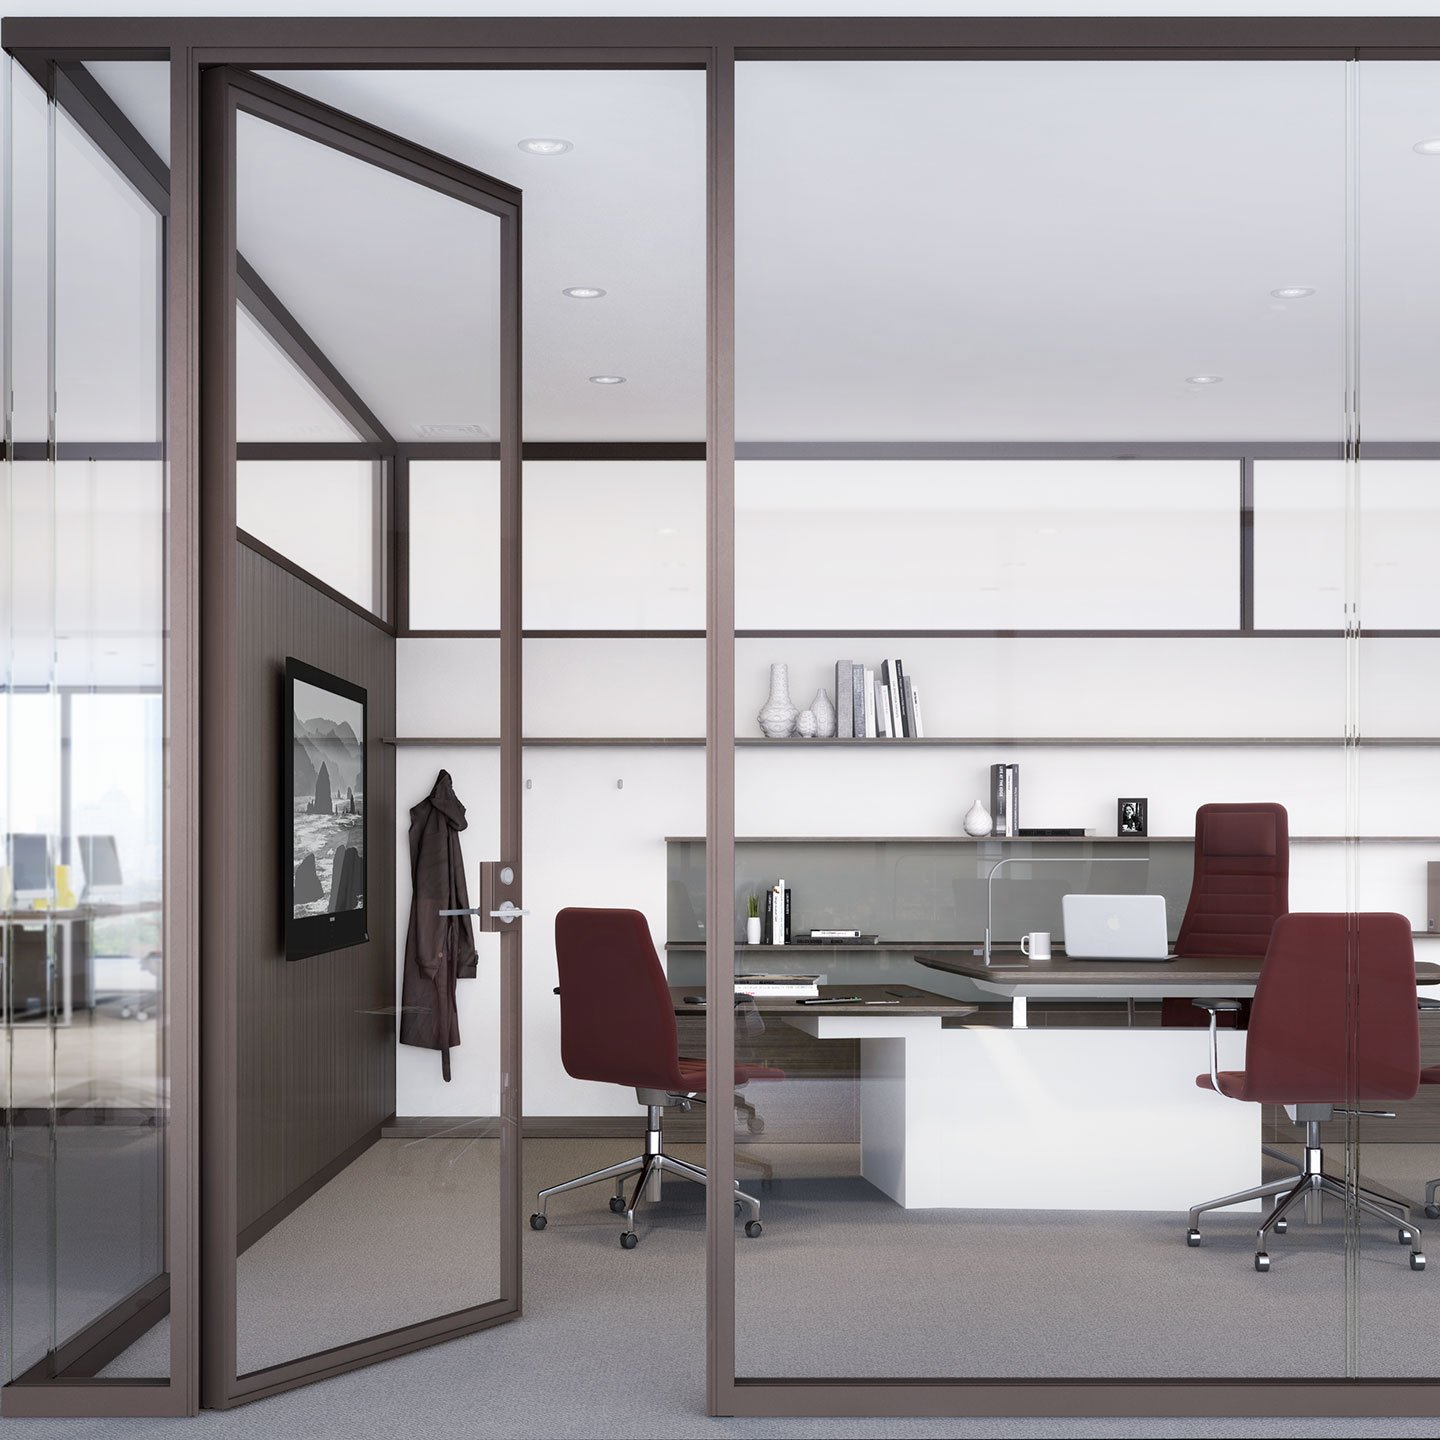 Haworth Trivati Wall for private office space with brown trim and brown executive veneer desk and red chairs with monitor on wall